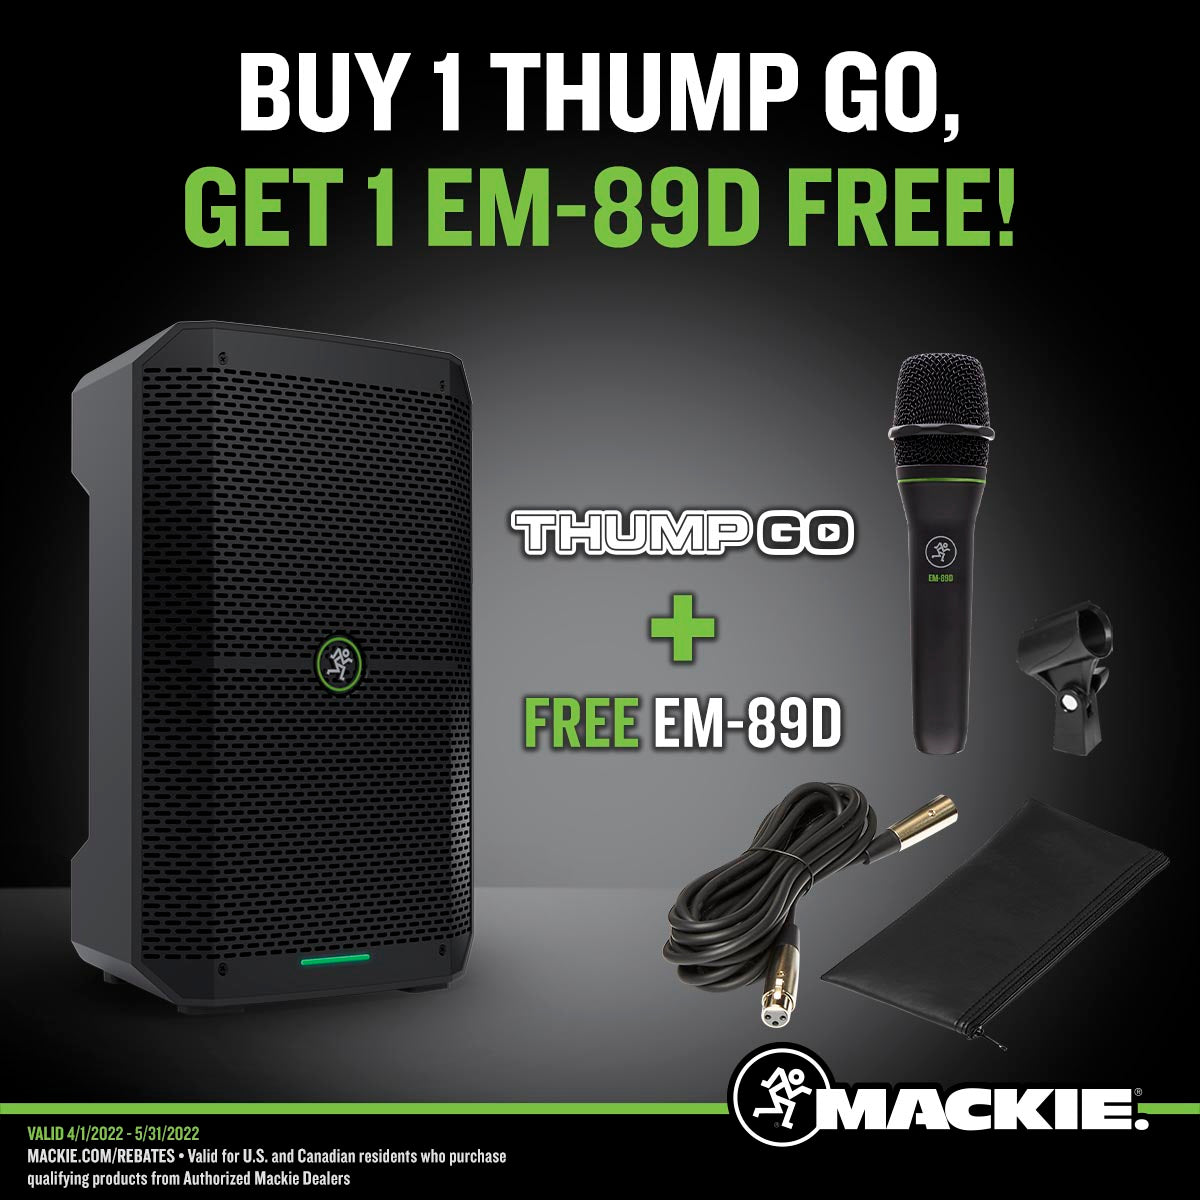 Mackie Thump GO 8" Portable Battery-Powered Rechargeable DJ PA Bluetooth Speaker+Get Free Mackie Microphone EM89D